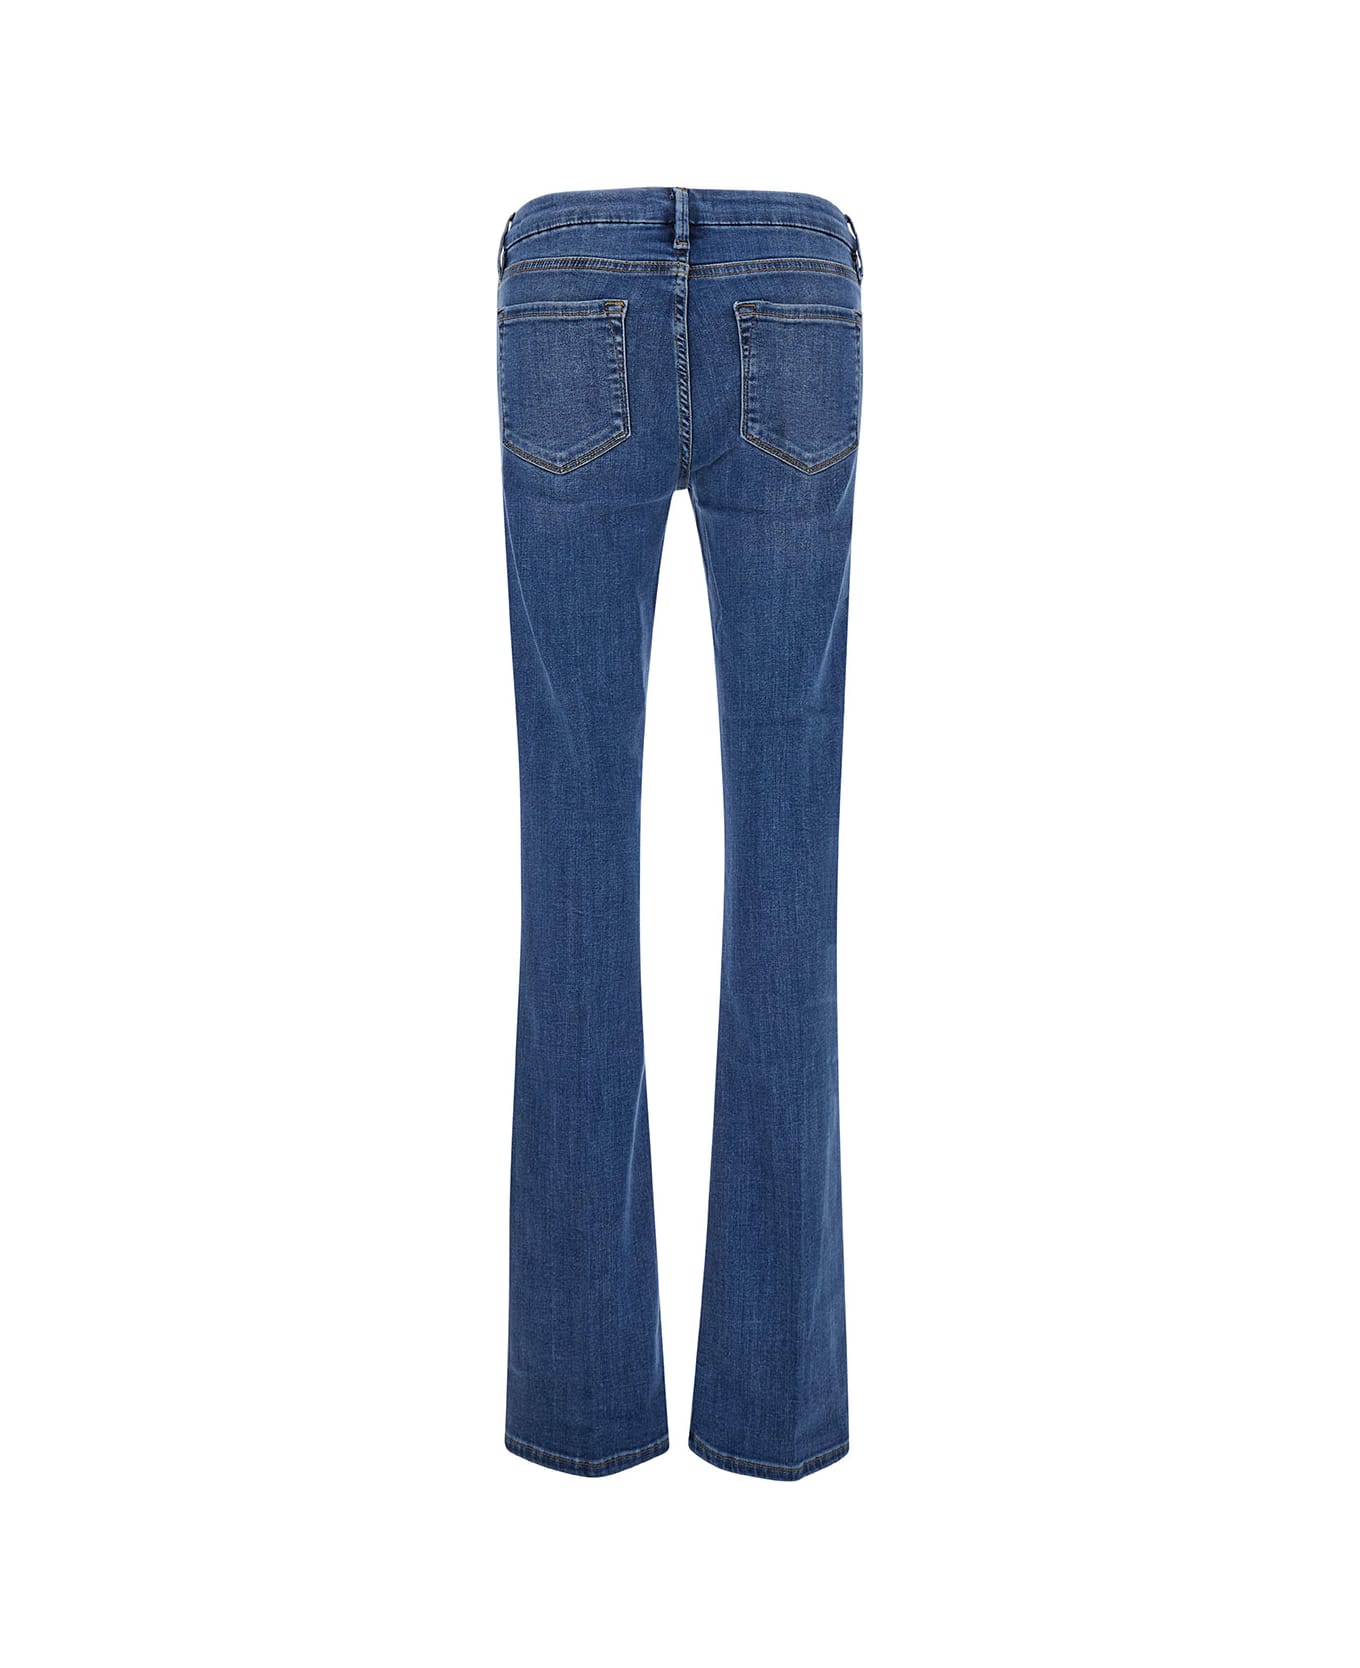 Frame 'mini Boot' Blue Flared Jeans With Branded Button In Cotton Blend Denim Woman - Blu